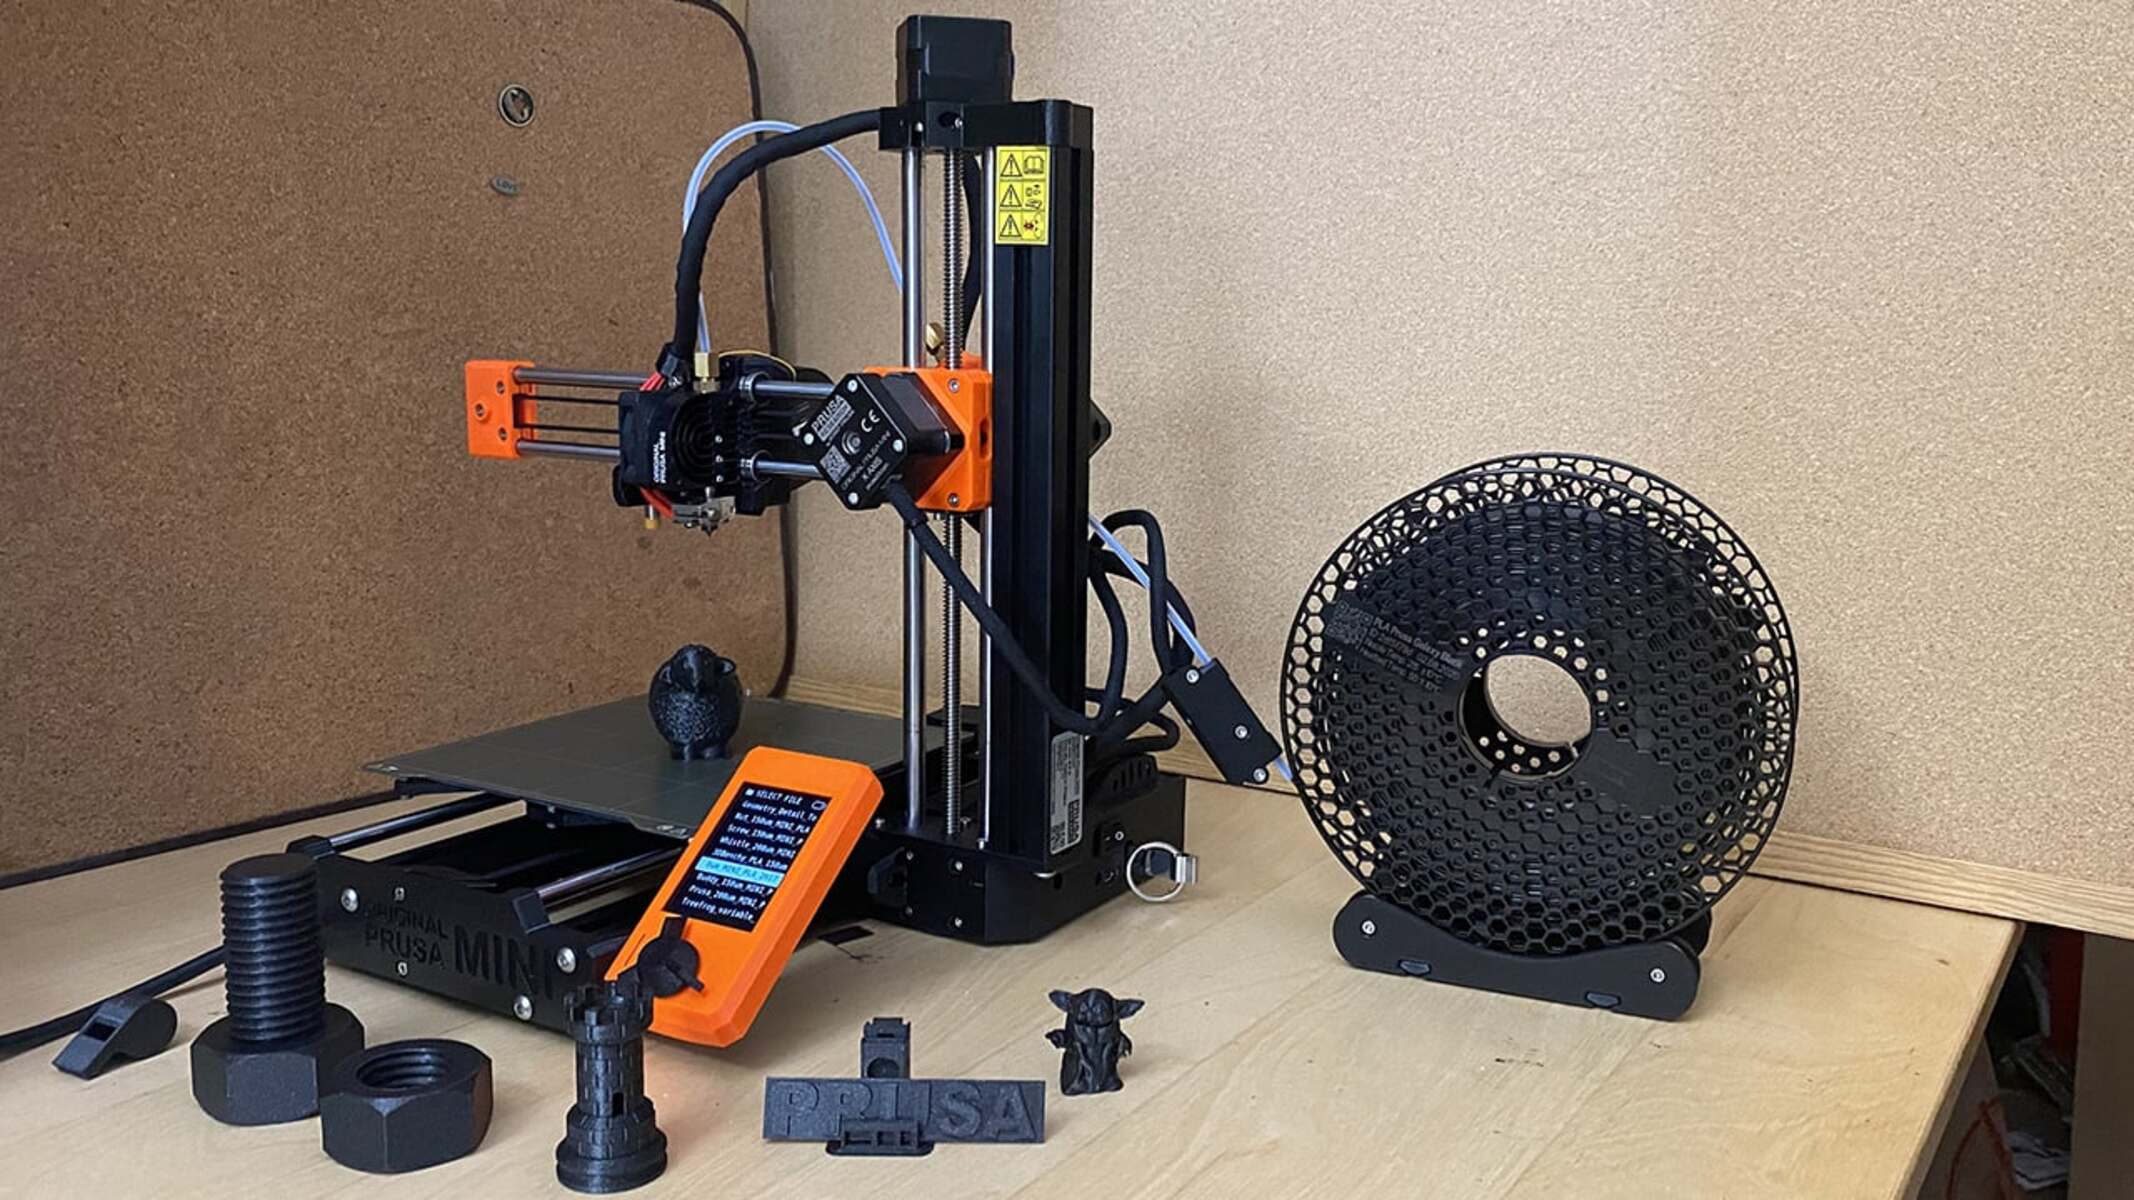 How To Find A 3D Printer IP Address